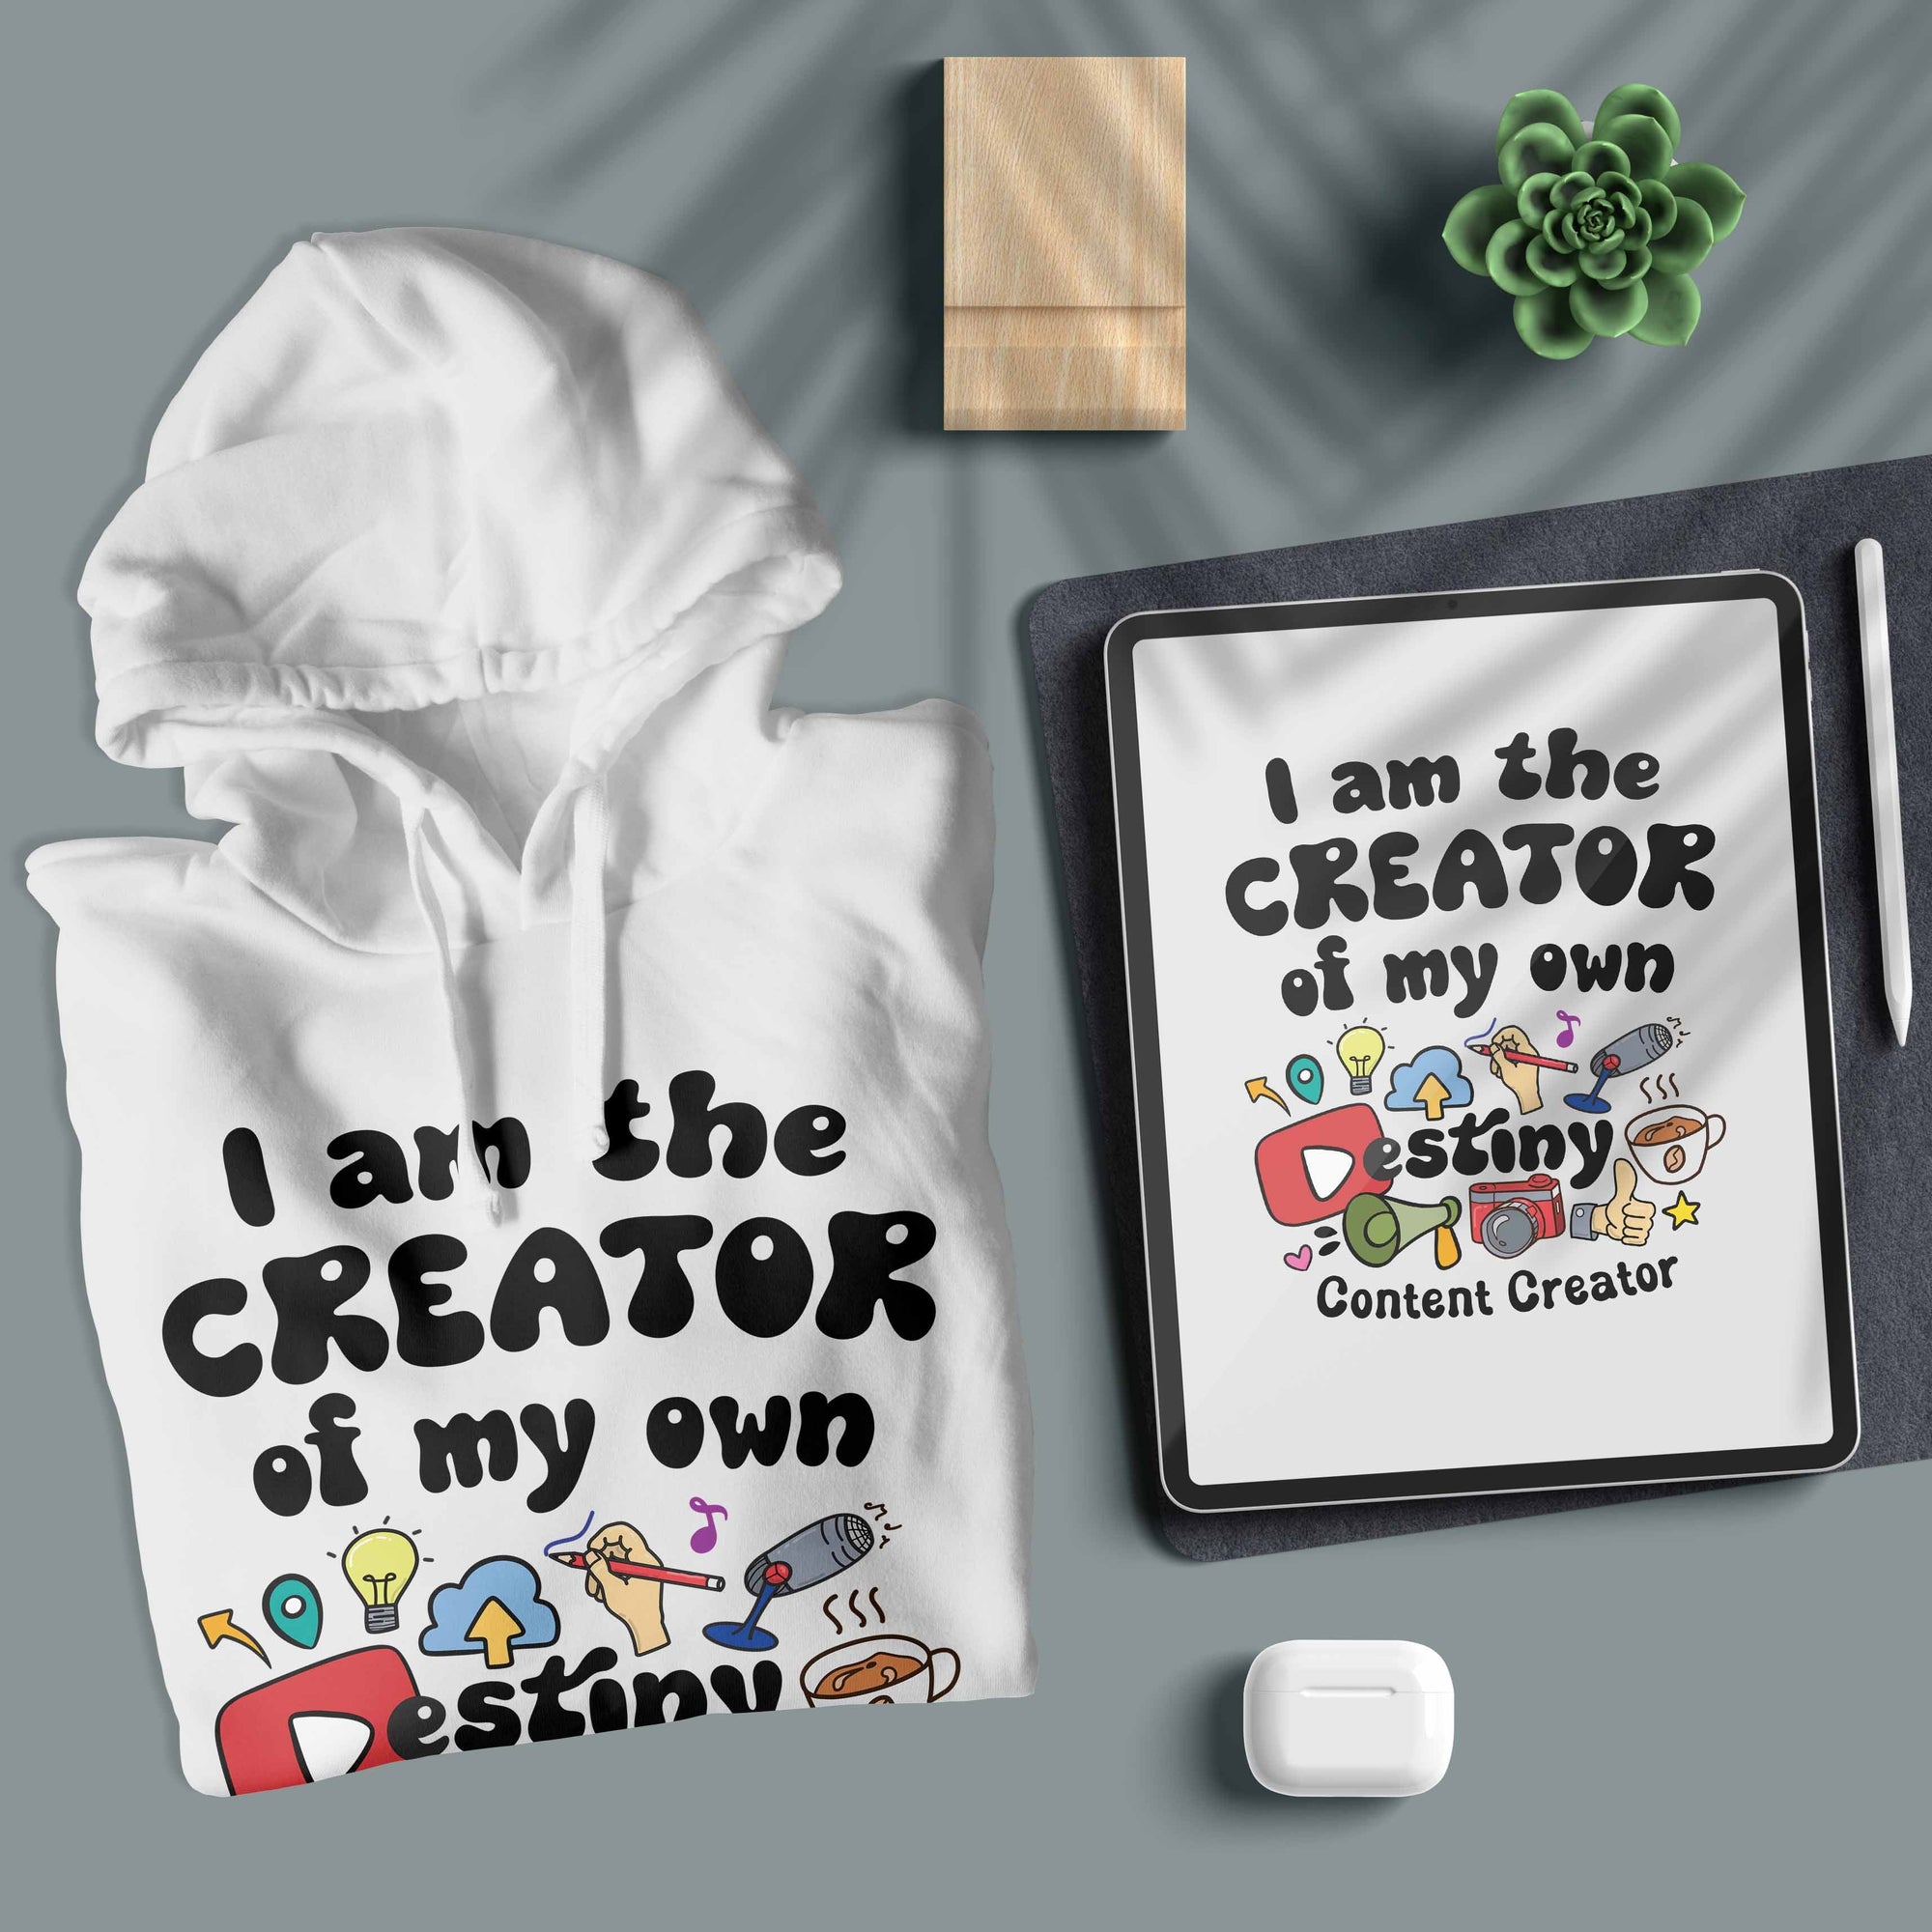 I Am The Creator Of My Own Destiny - Content Creator - Unisex Hoodie